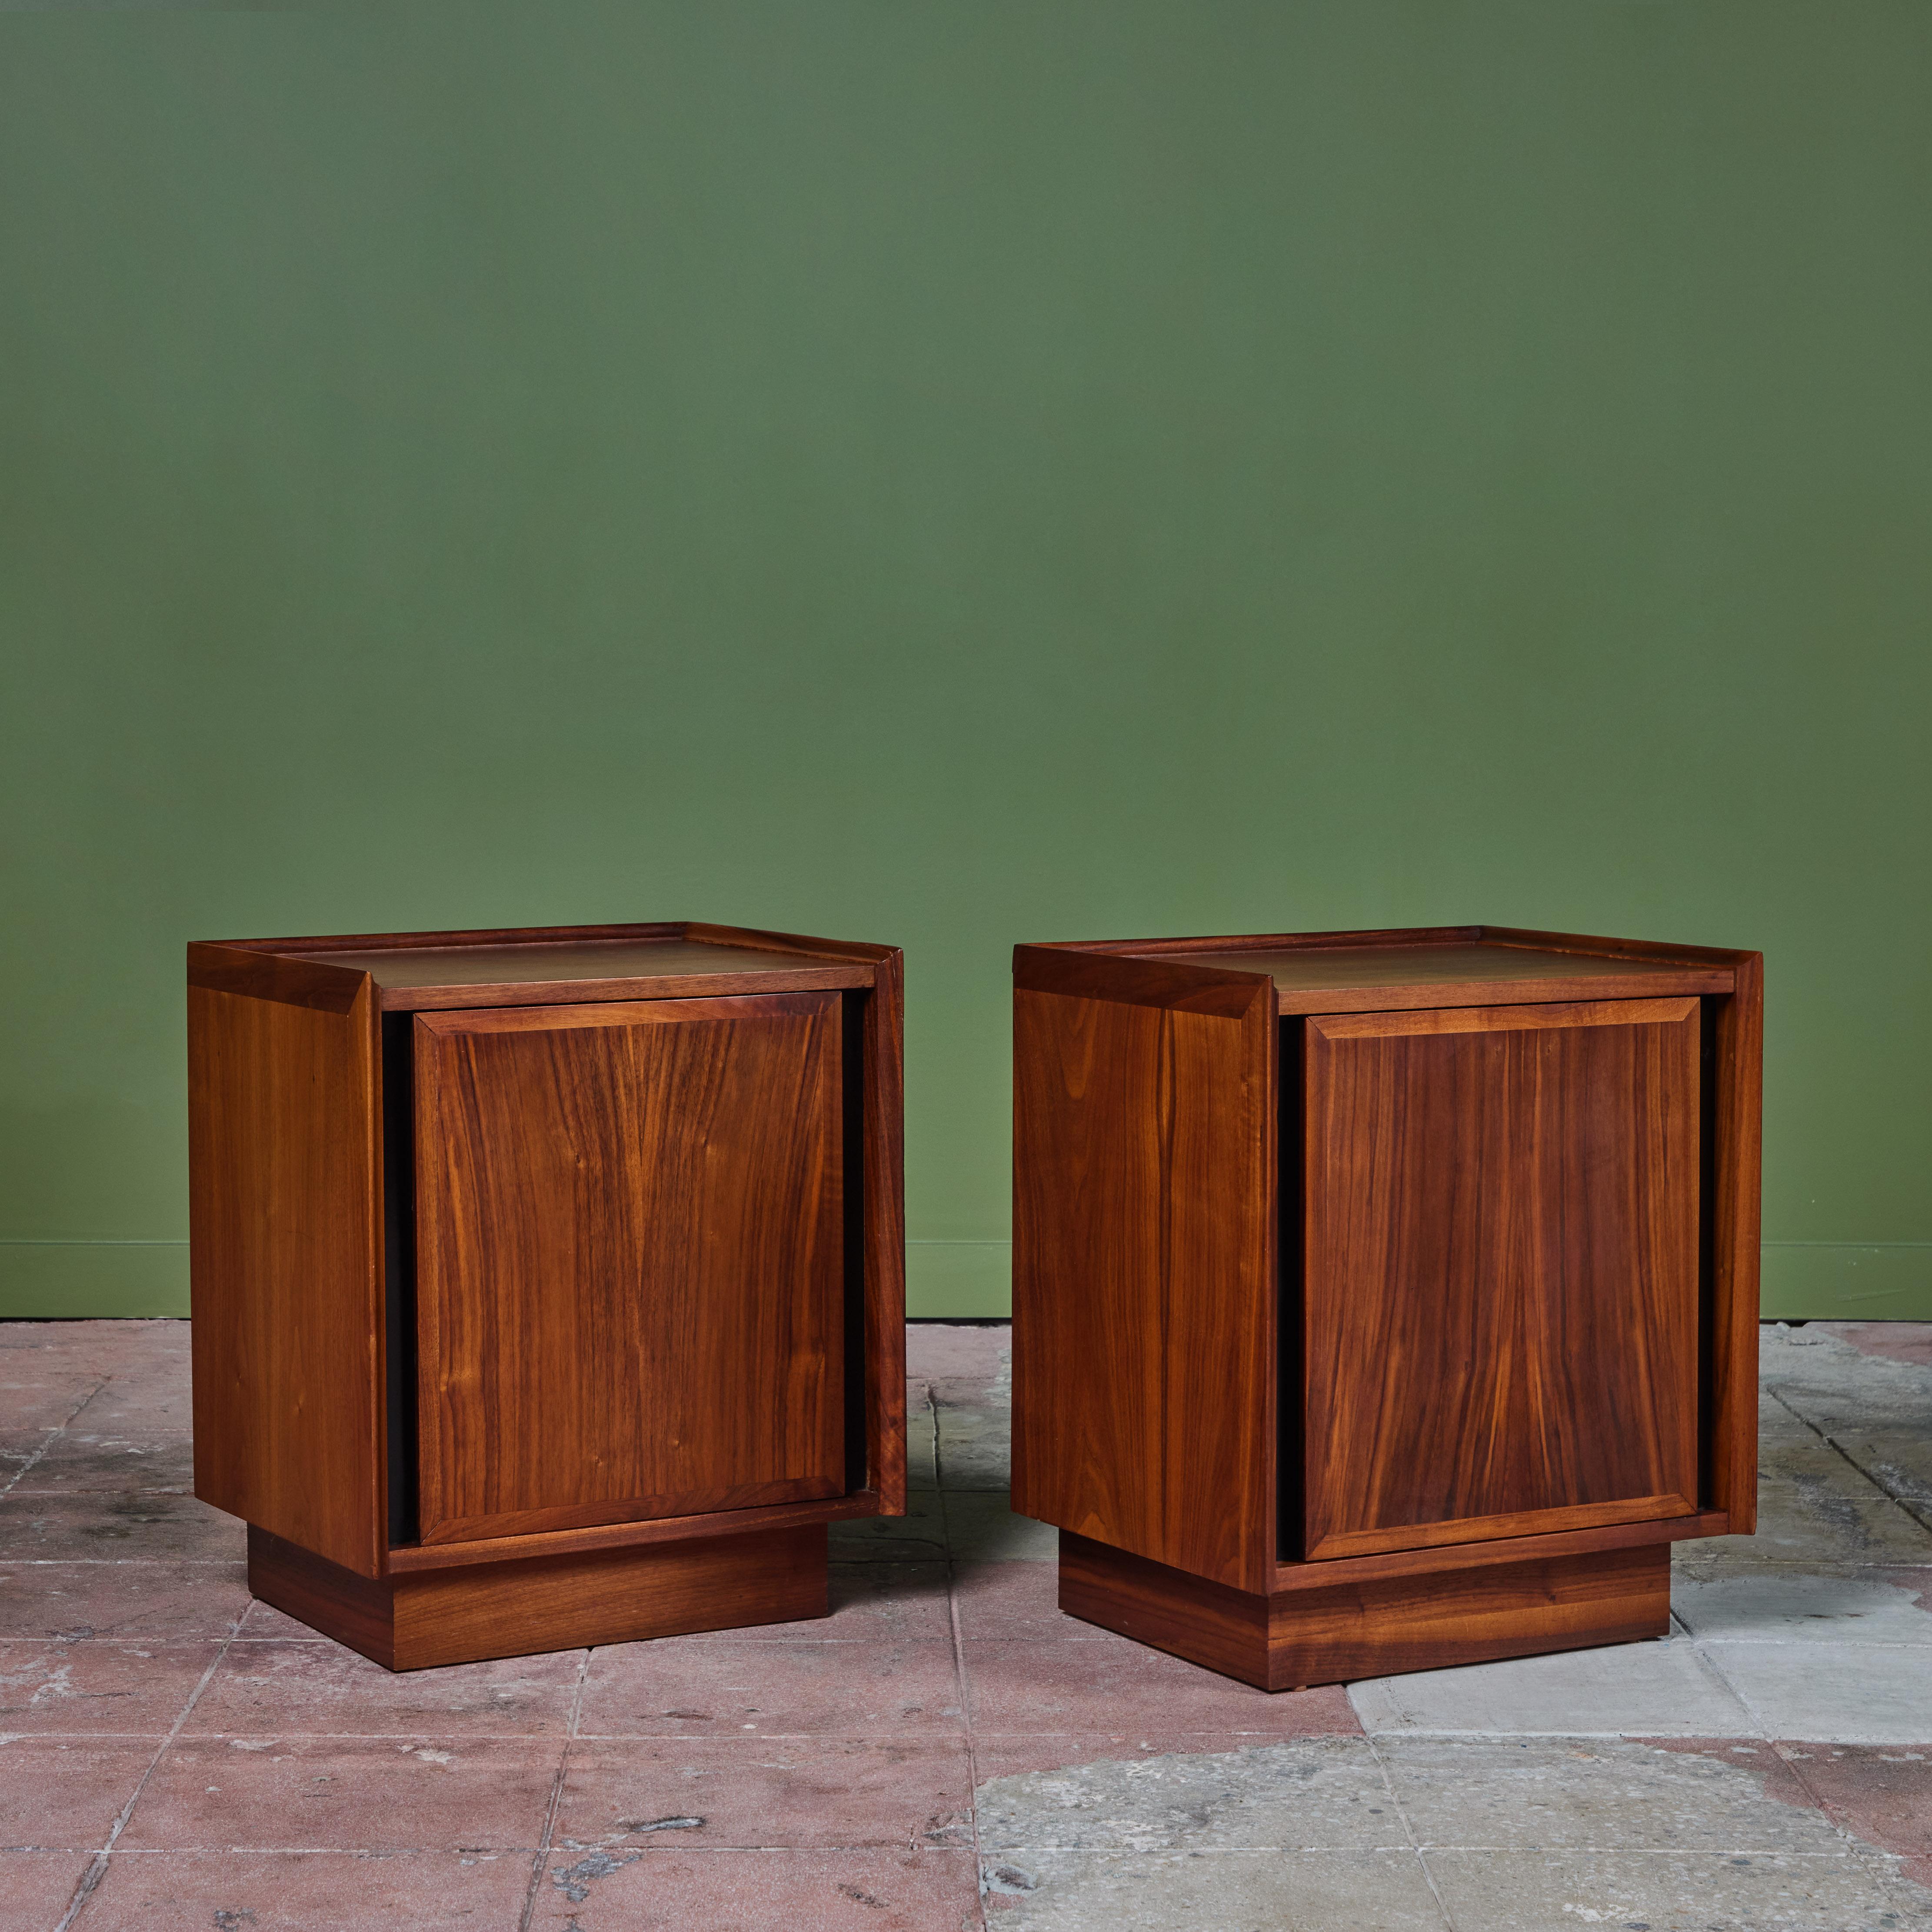 Pair of walnut nightstands by Merton L. Gershun for Dillingham, c.1960s, USA. The nightstands each feature a single door front with beveled sides. The hinged doors open to reveal a wide storage cabinet with pull-out white laminated drawers. The